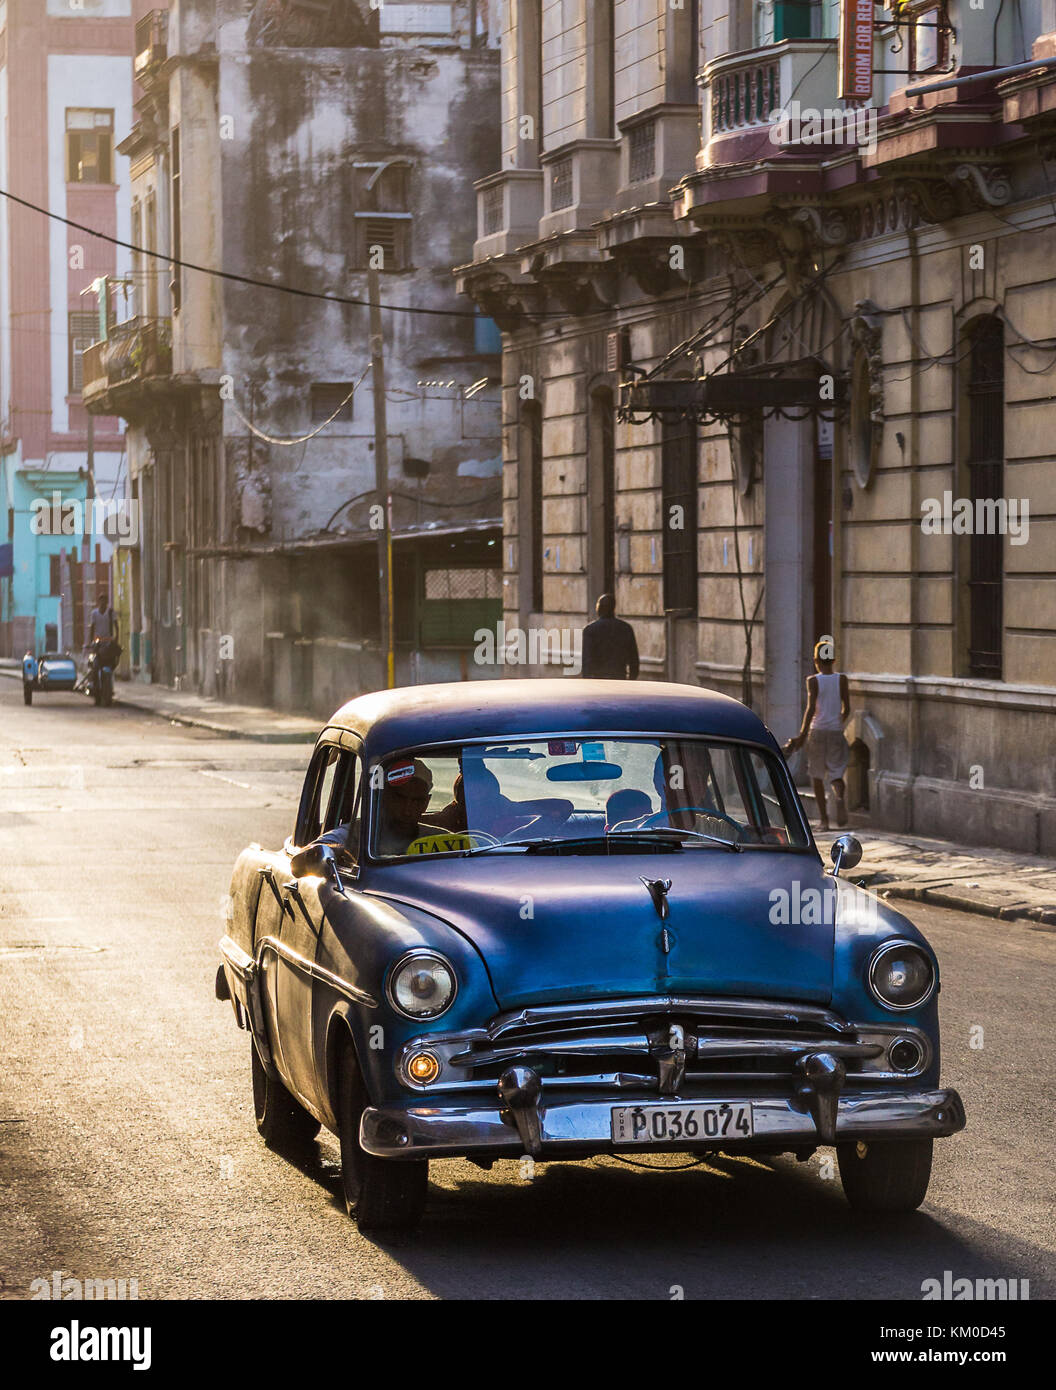 The golden light of another stunning Caribbean sunset bathes a purple classical car in soft light one evening in Centro Havana during August 2014. Stock Photo